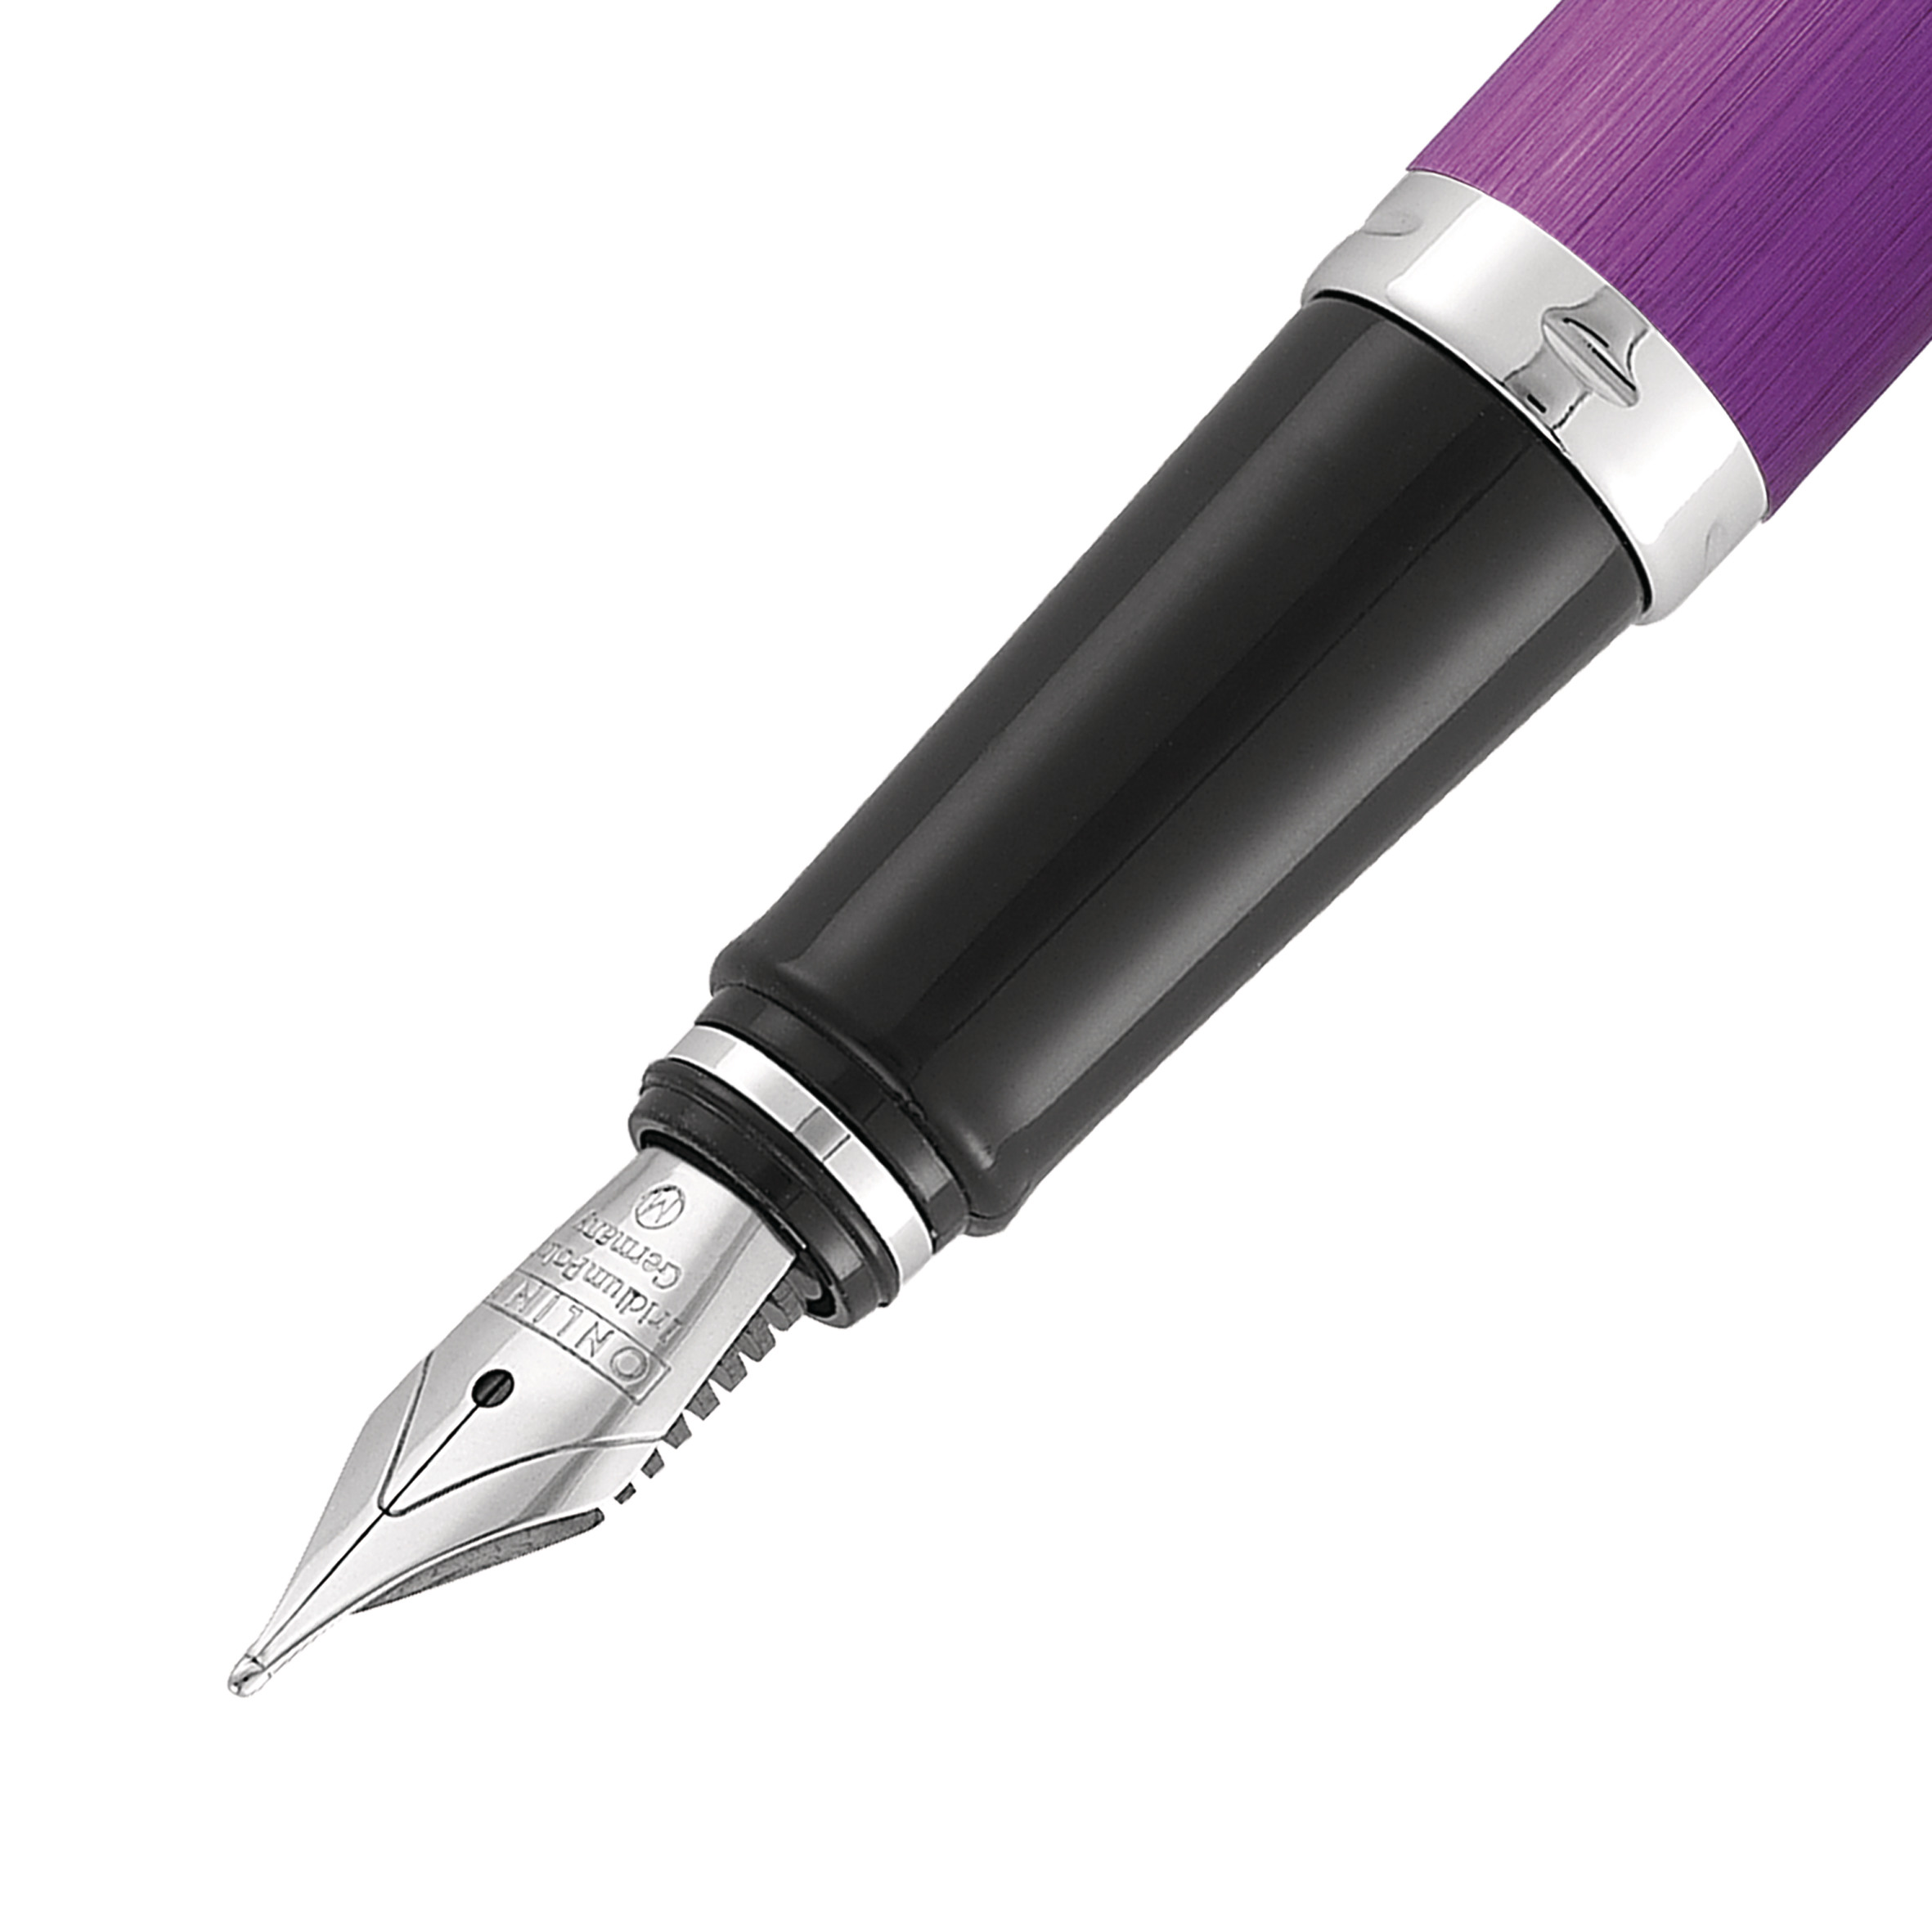 ONLINE Stylo plume Set Vision 0.5mm 36637 Lilac